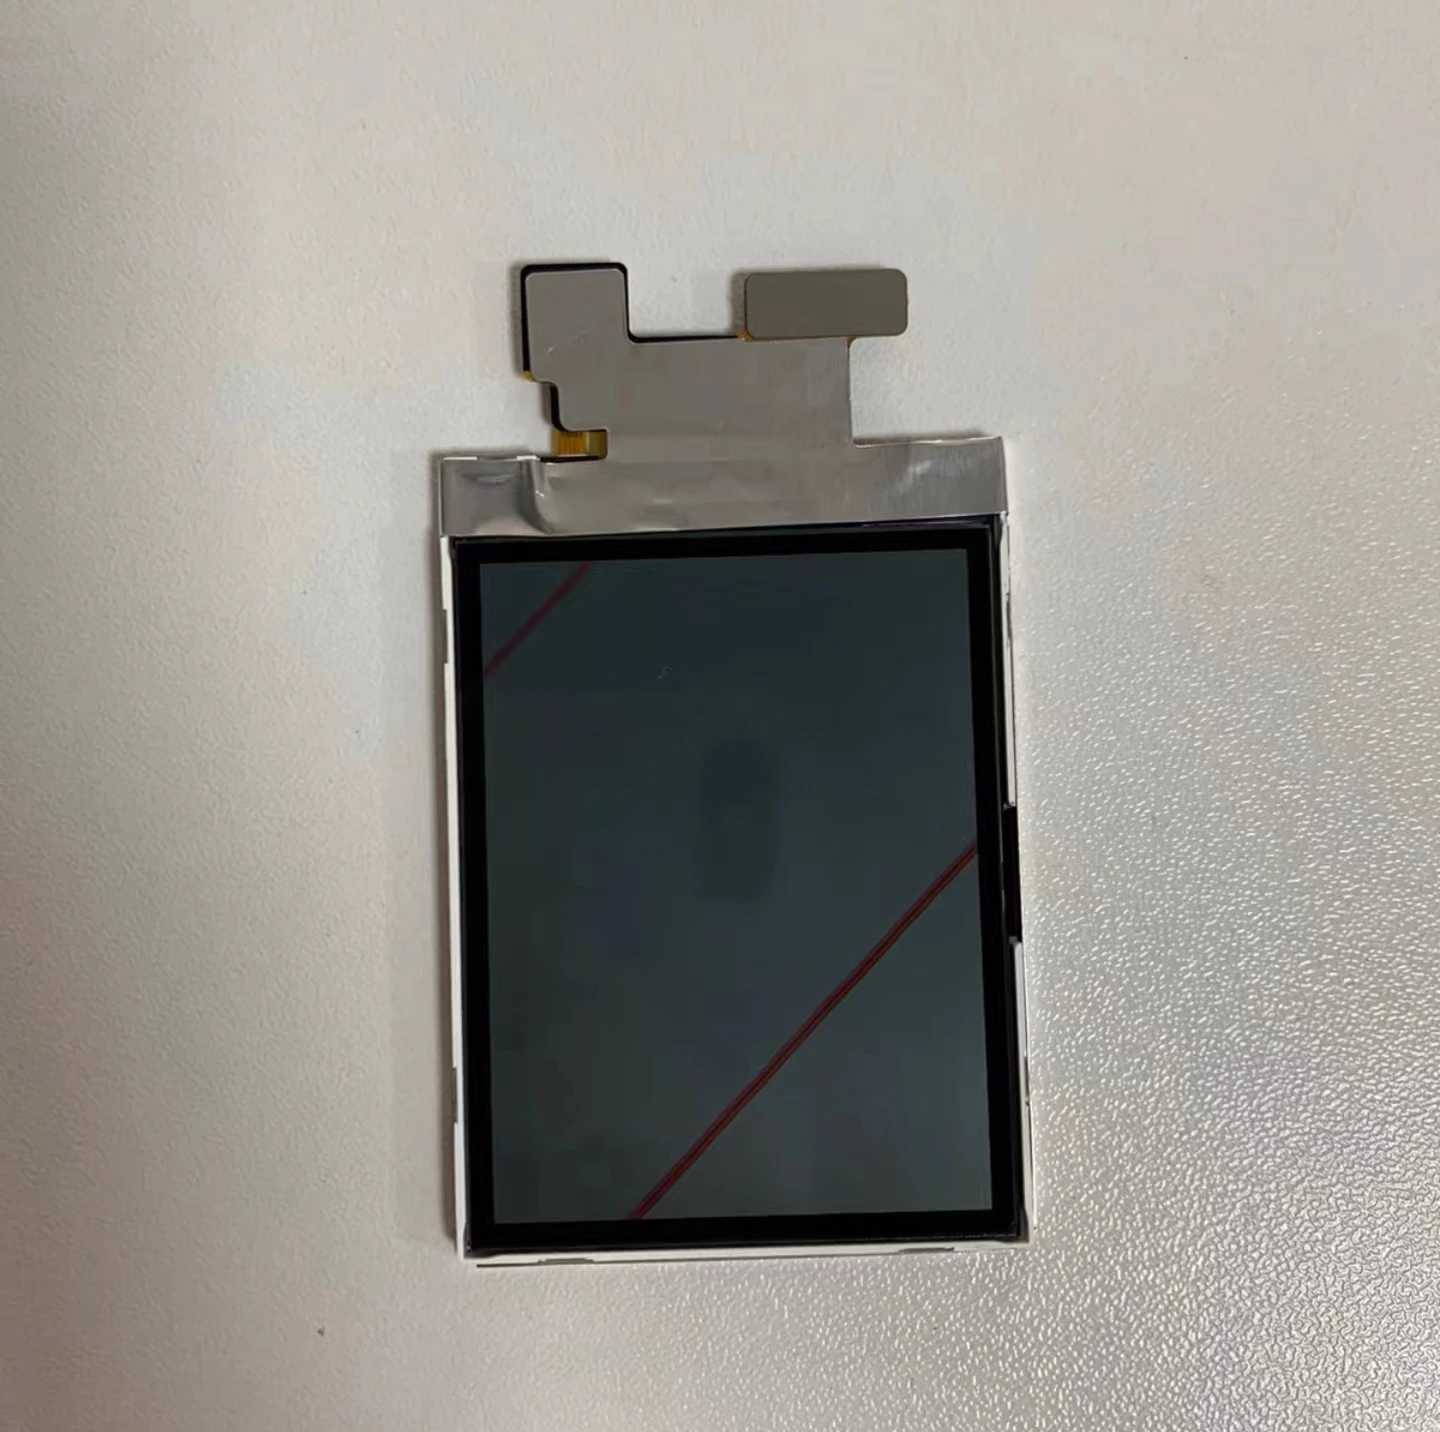 

New Original 2.4 inches TFT1P1824-E TFT1P1824-S-W-E LCD Display Screen is Suitable For Free Shipping When Replacing LCD Screens